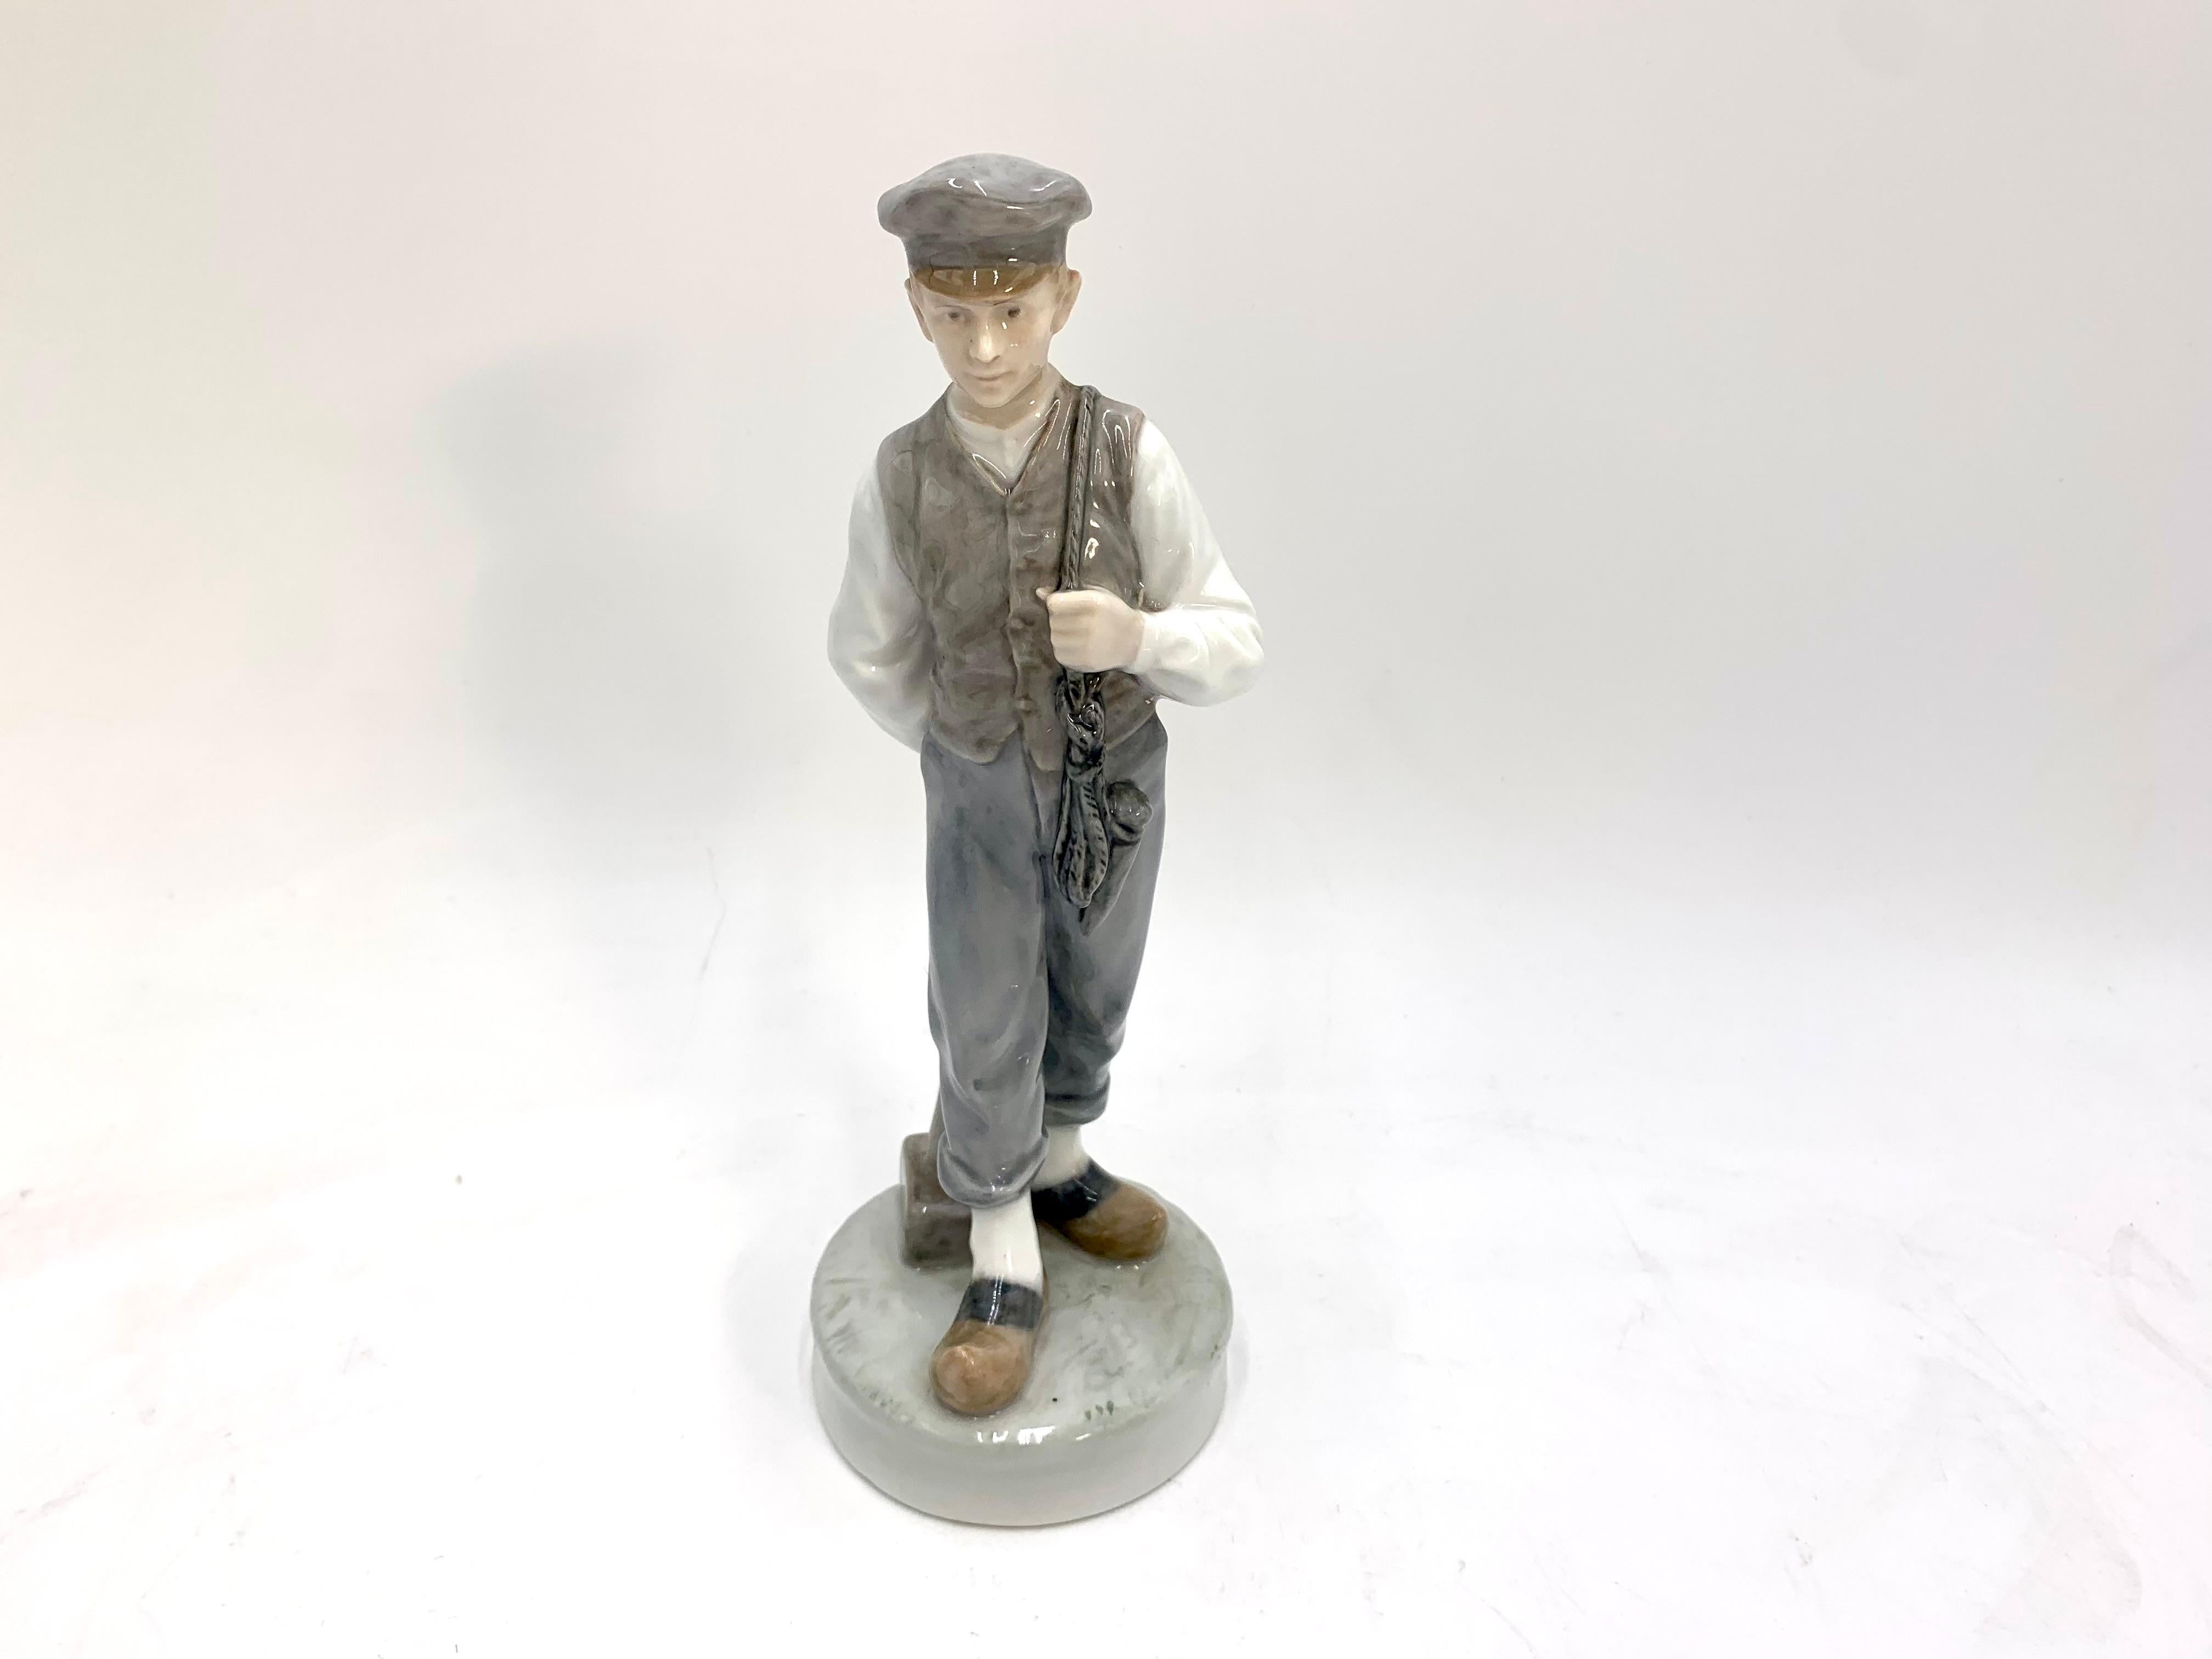 Porcelain figurine of a boy (shepherd) with a hammer

Made in Denmark by the Royal Copenhagen manufactory

Manufactured in 1945.

Model number # 620

Very good condition, no damage.

Measures: height 22.5 width 7cm depth 8cm.